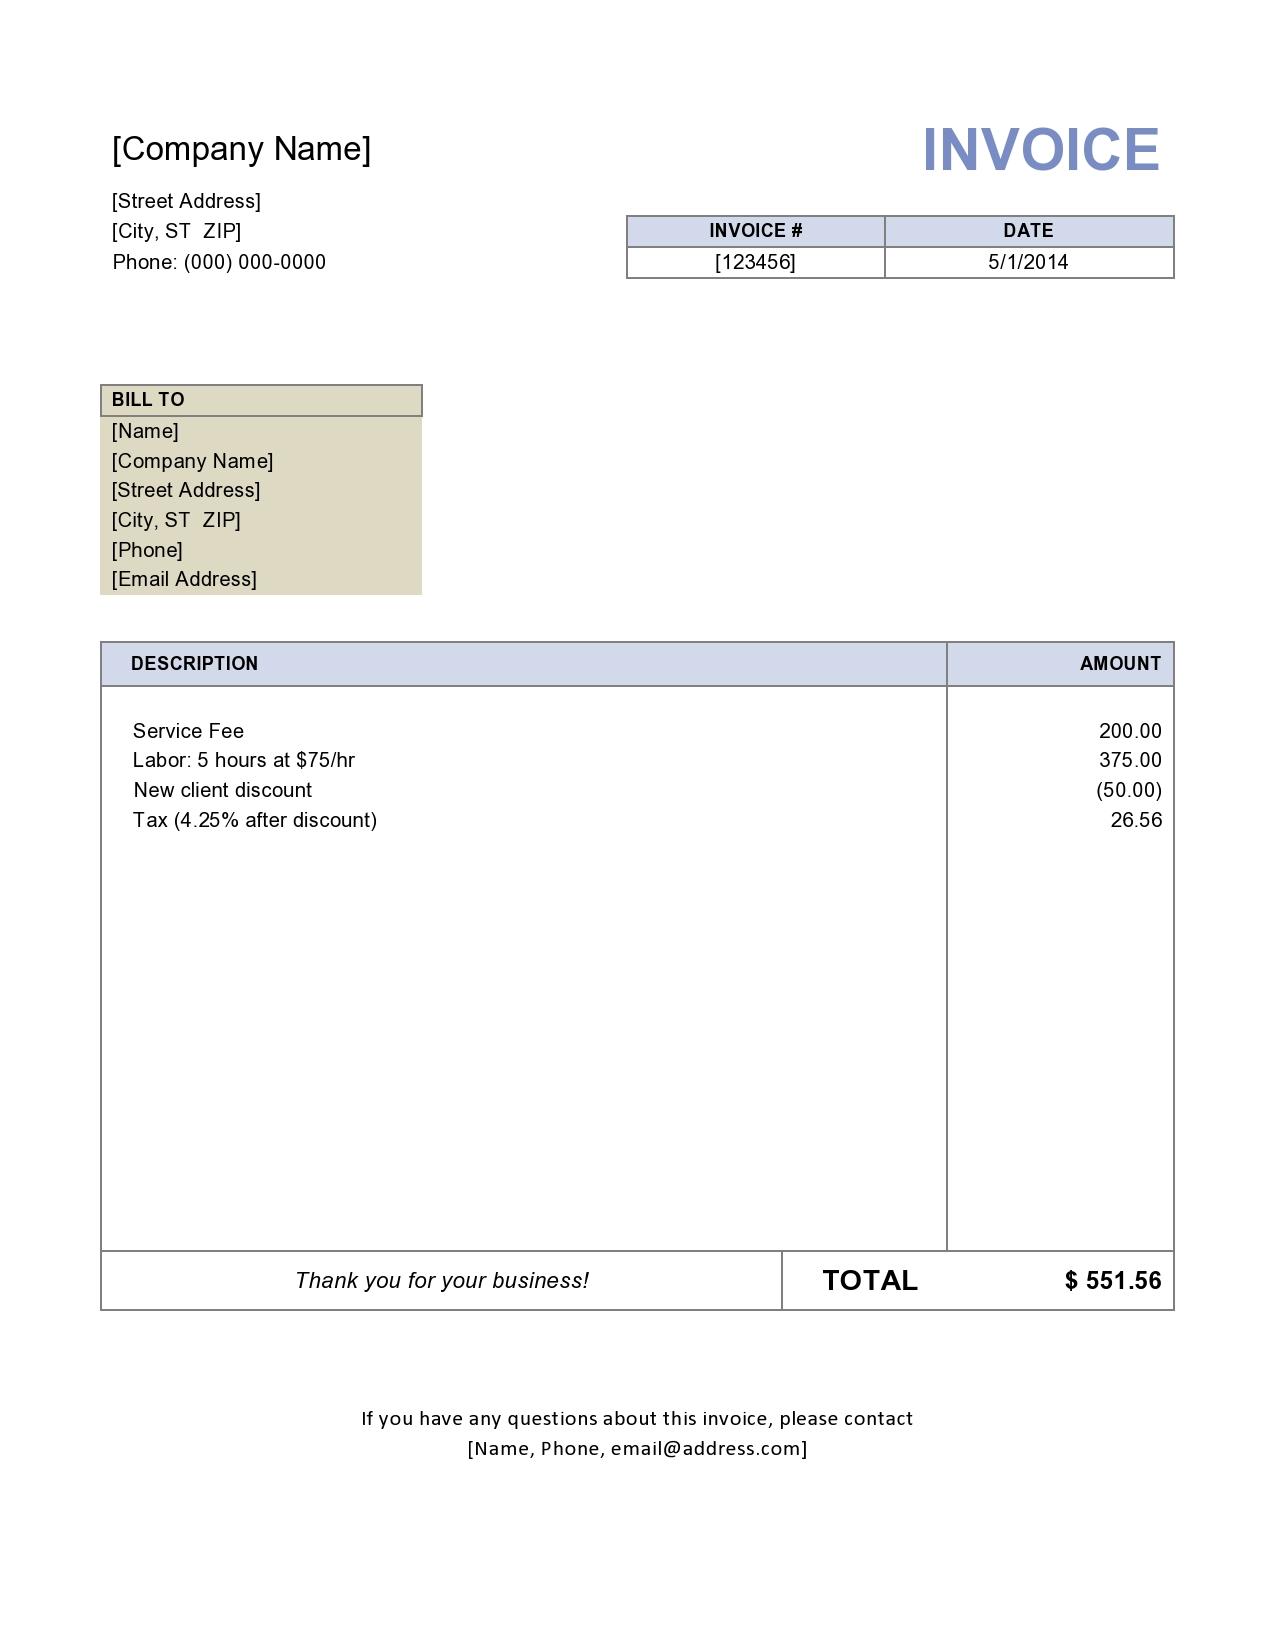 Invoice Template Free  Small Business Invoice Template With Free Invoice Template Word Mac